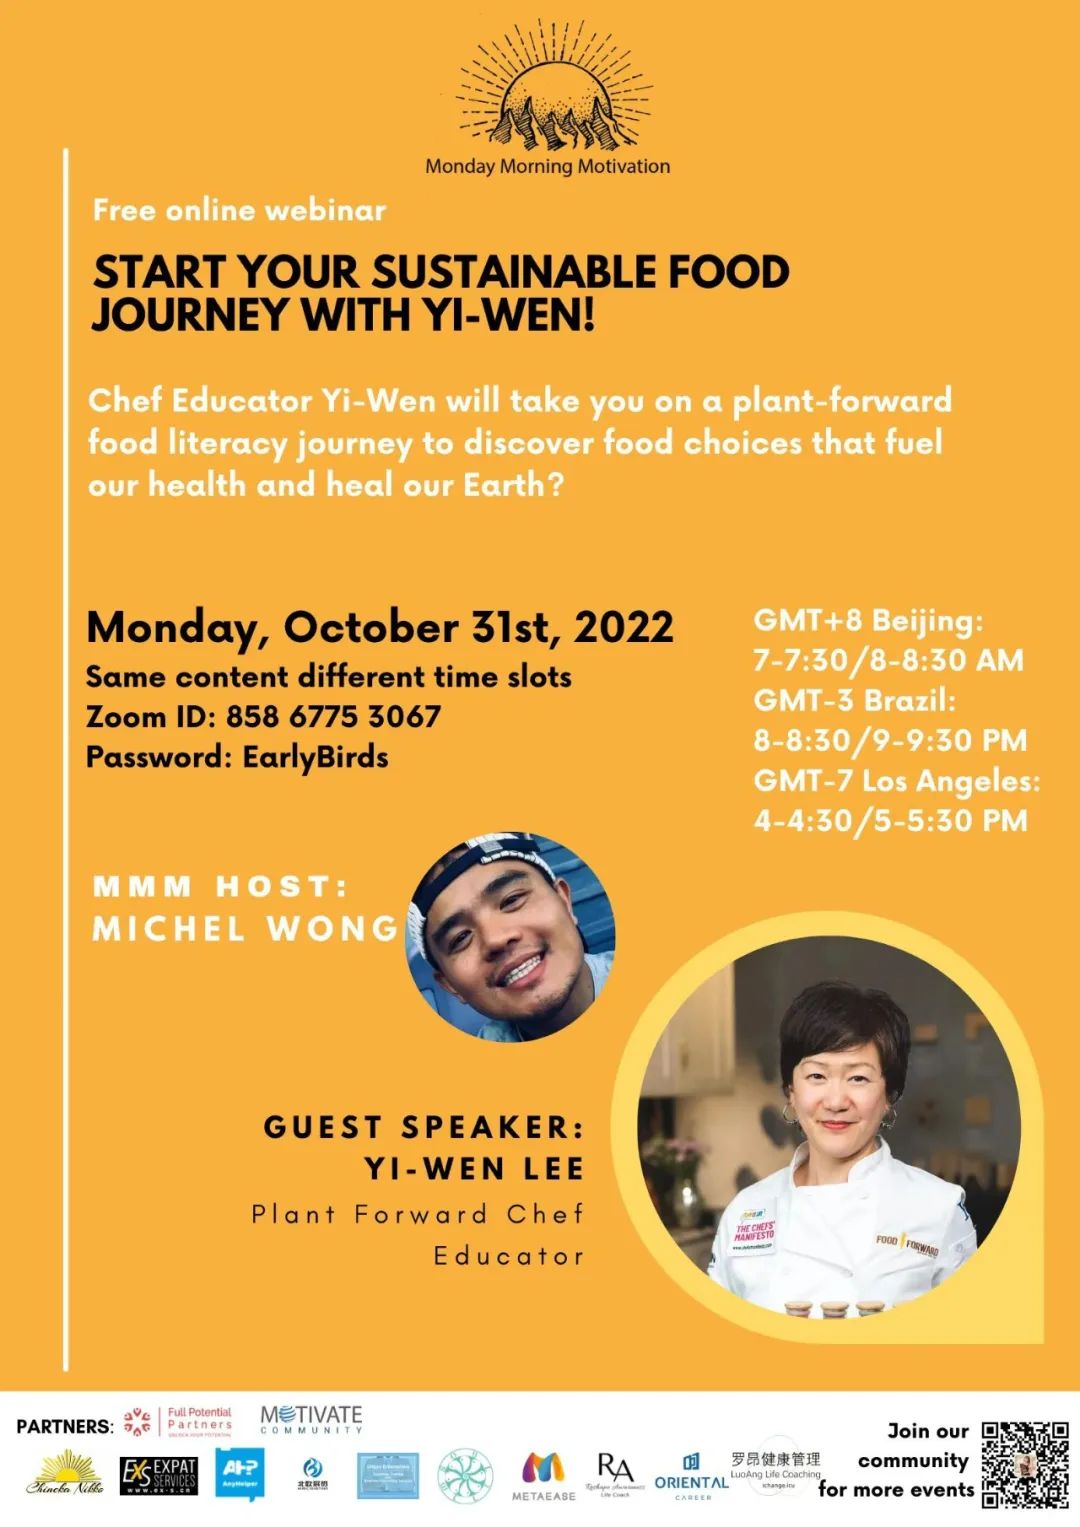 Start your sustainable food journey with YI-WEN